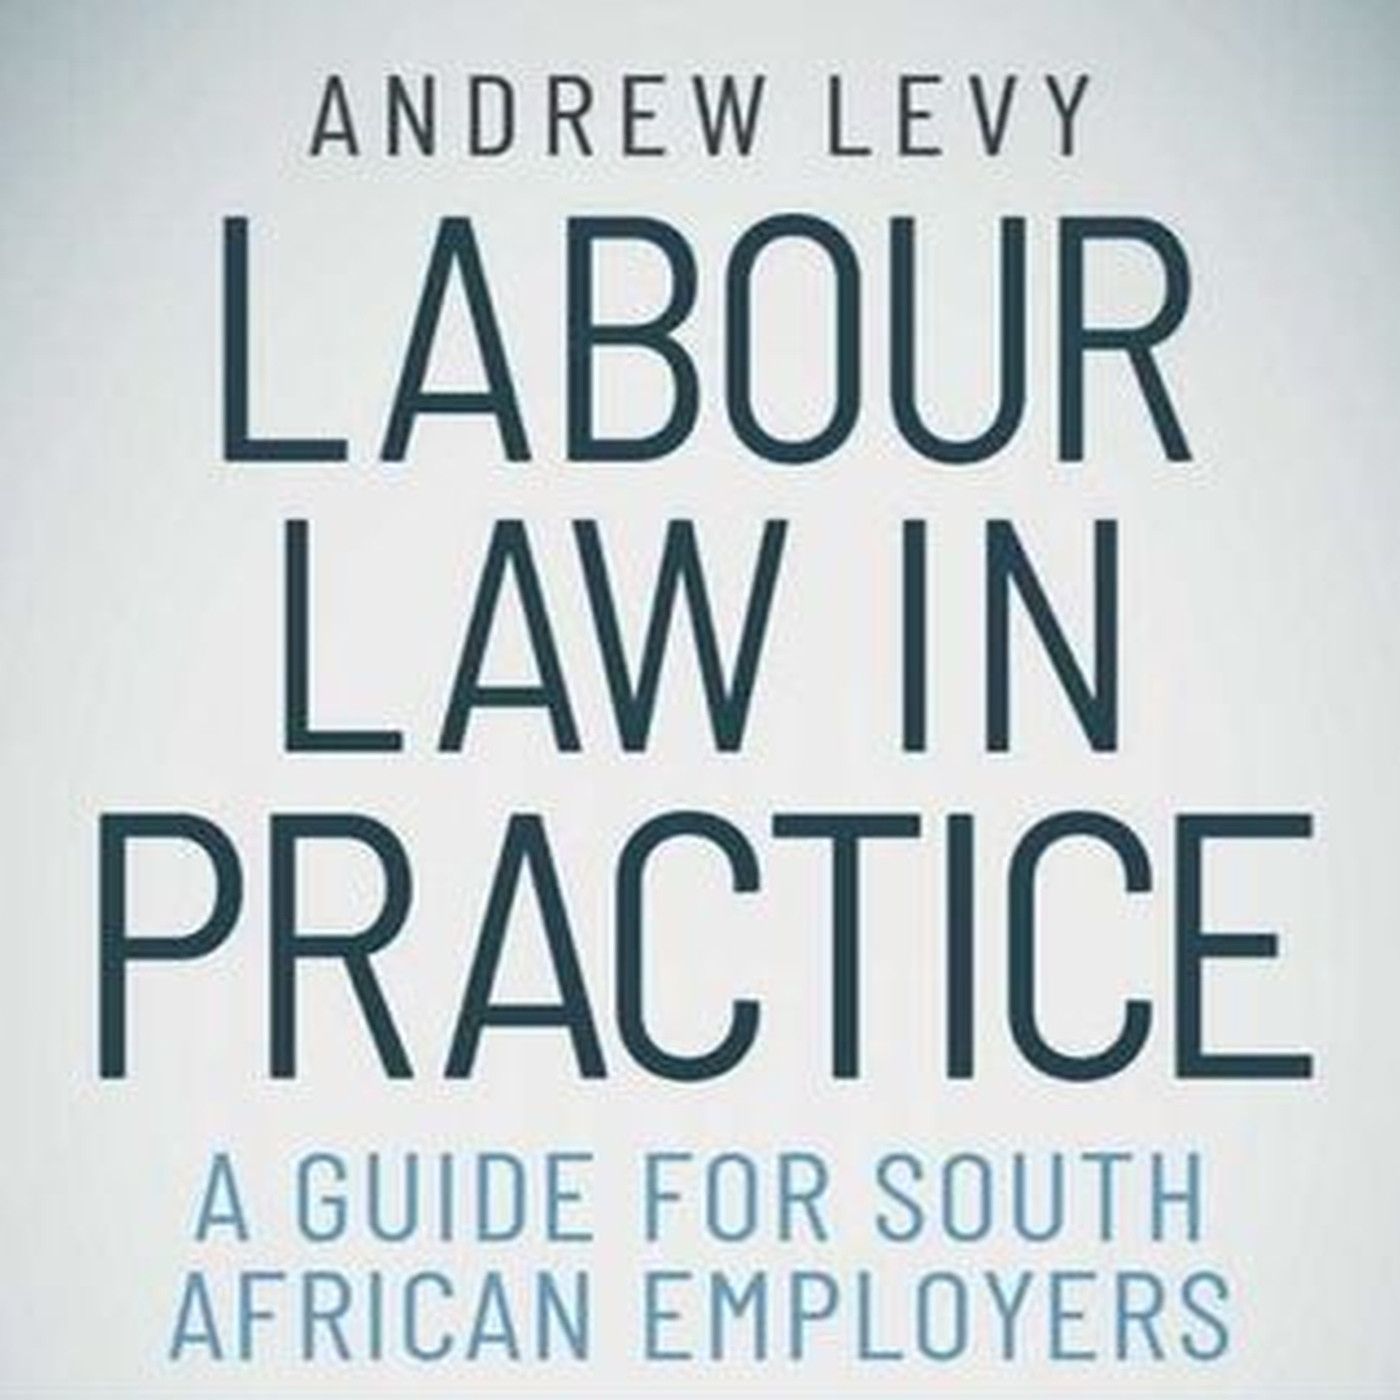 #013 Andrew Levy's Labour Law in Practice 2nd Revised Edition